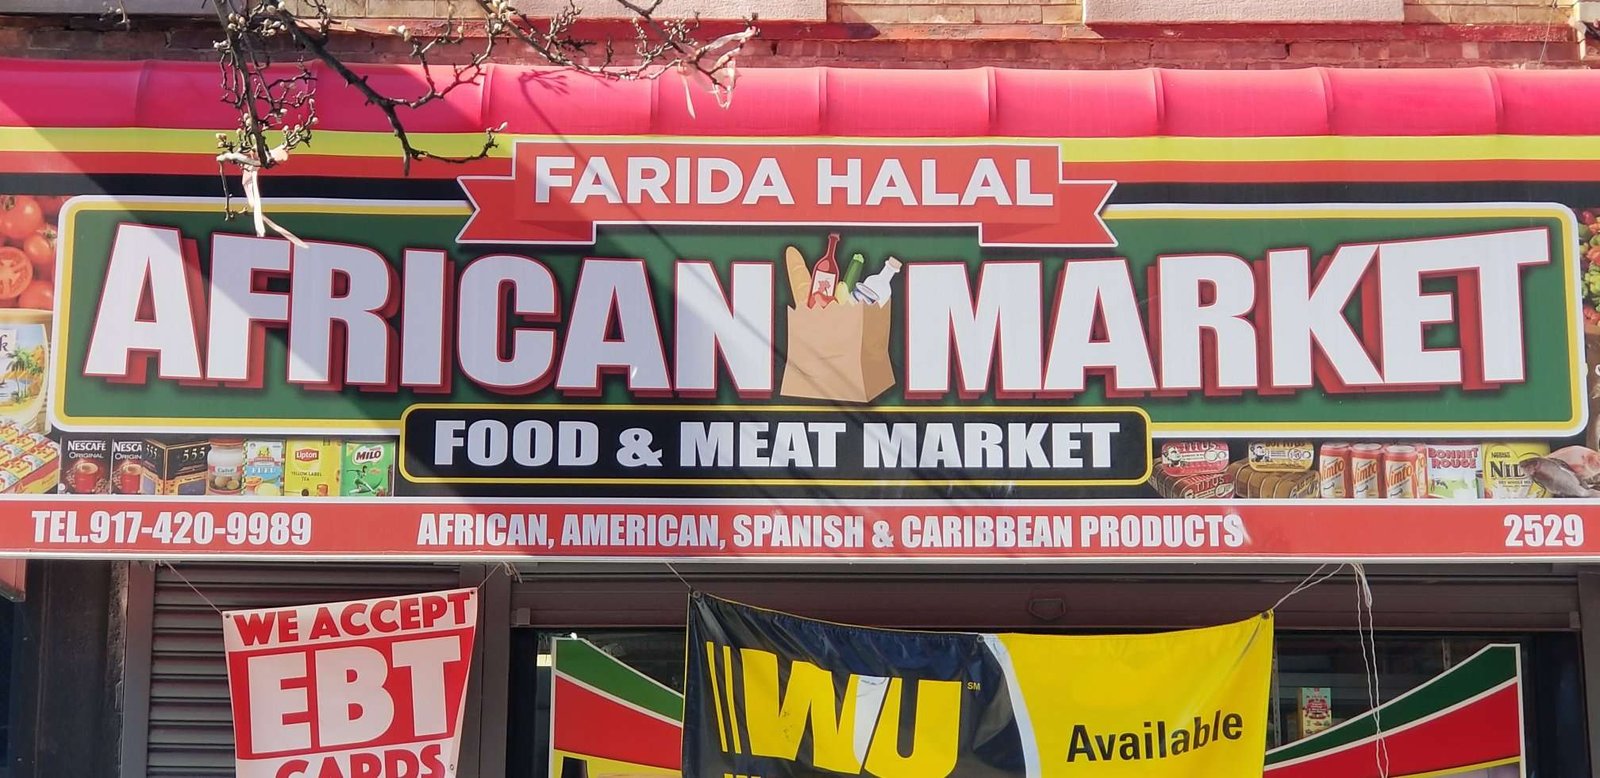 Is trading halal